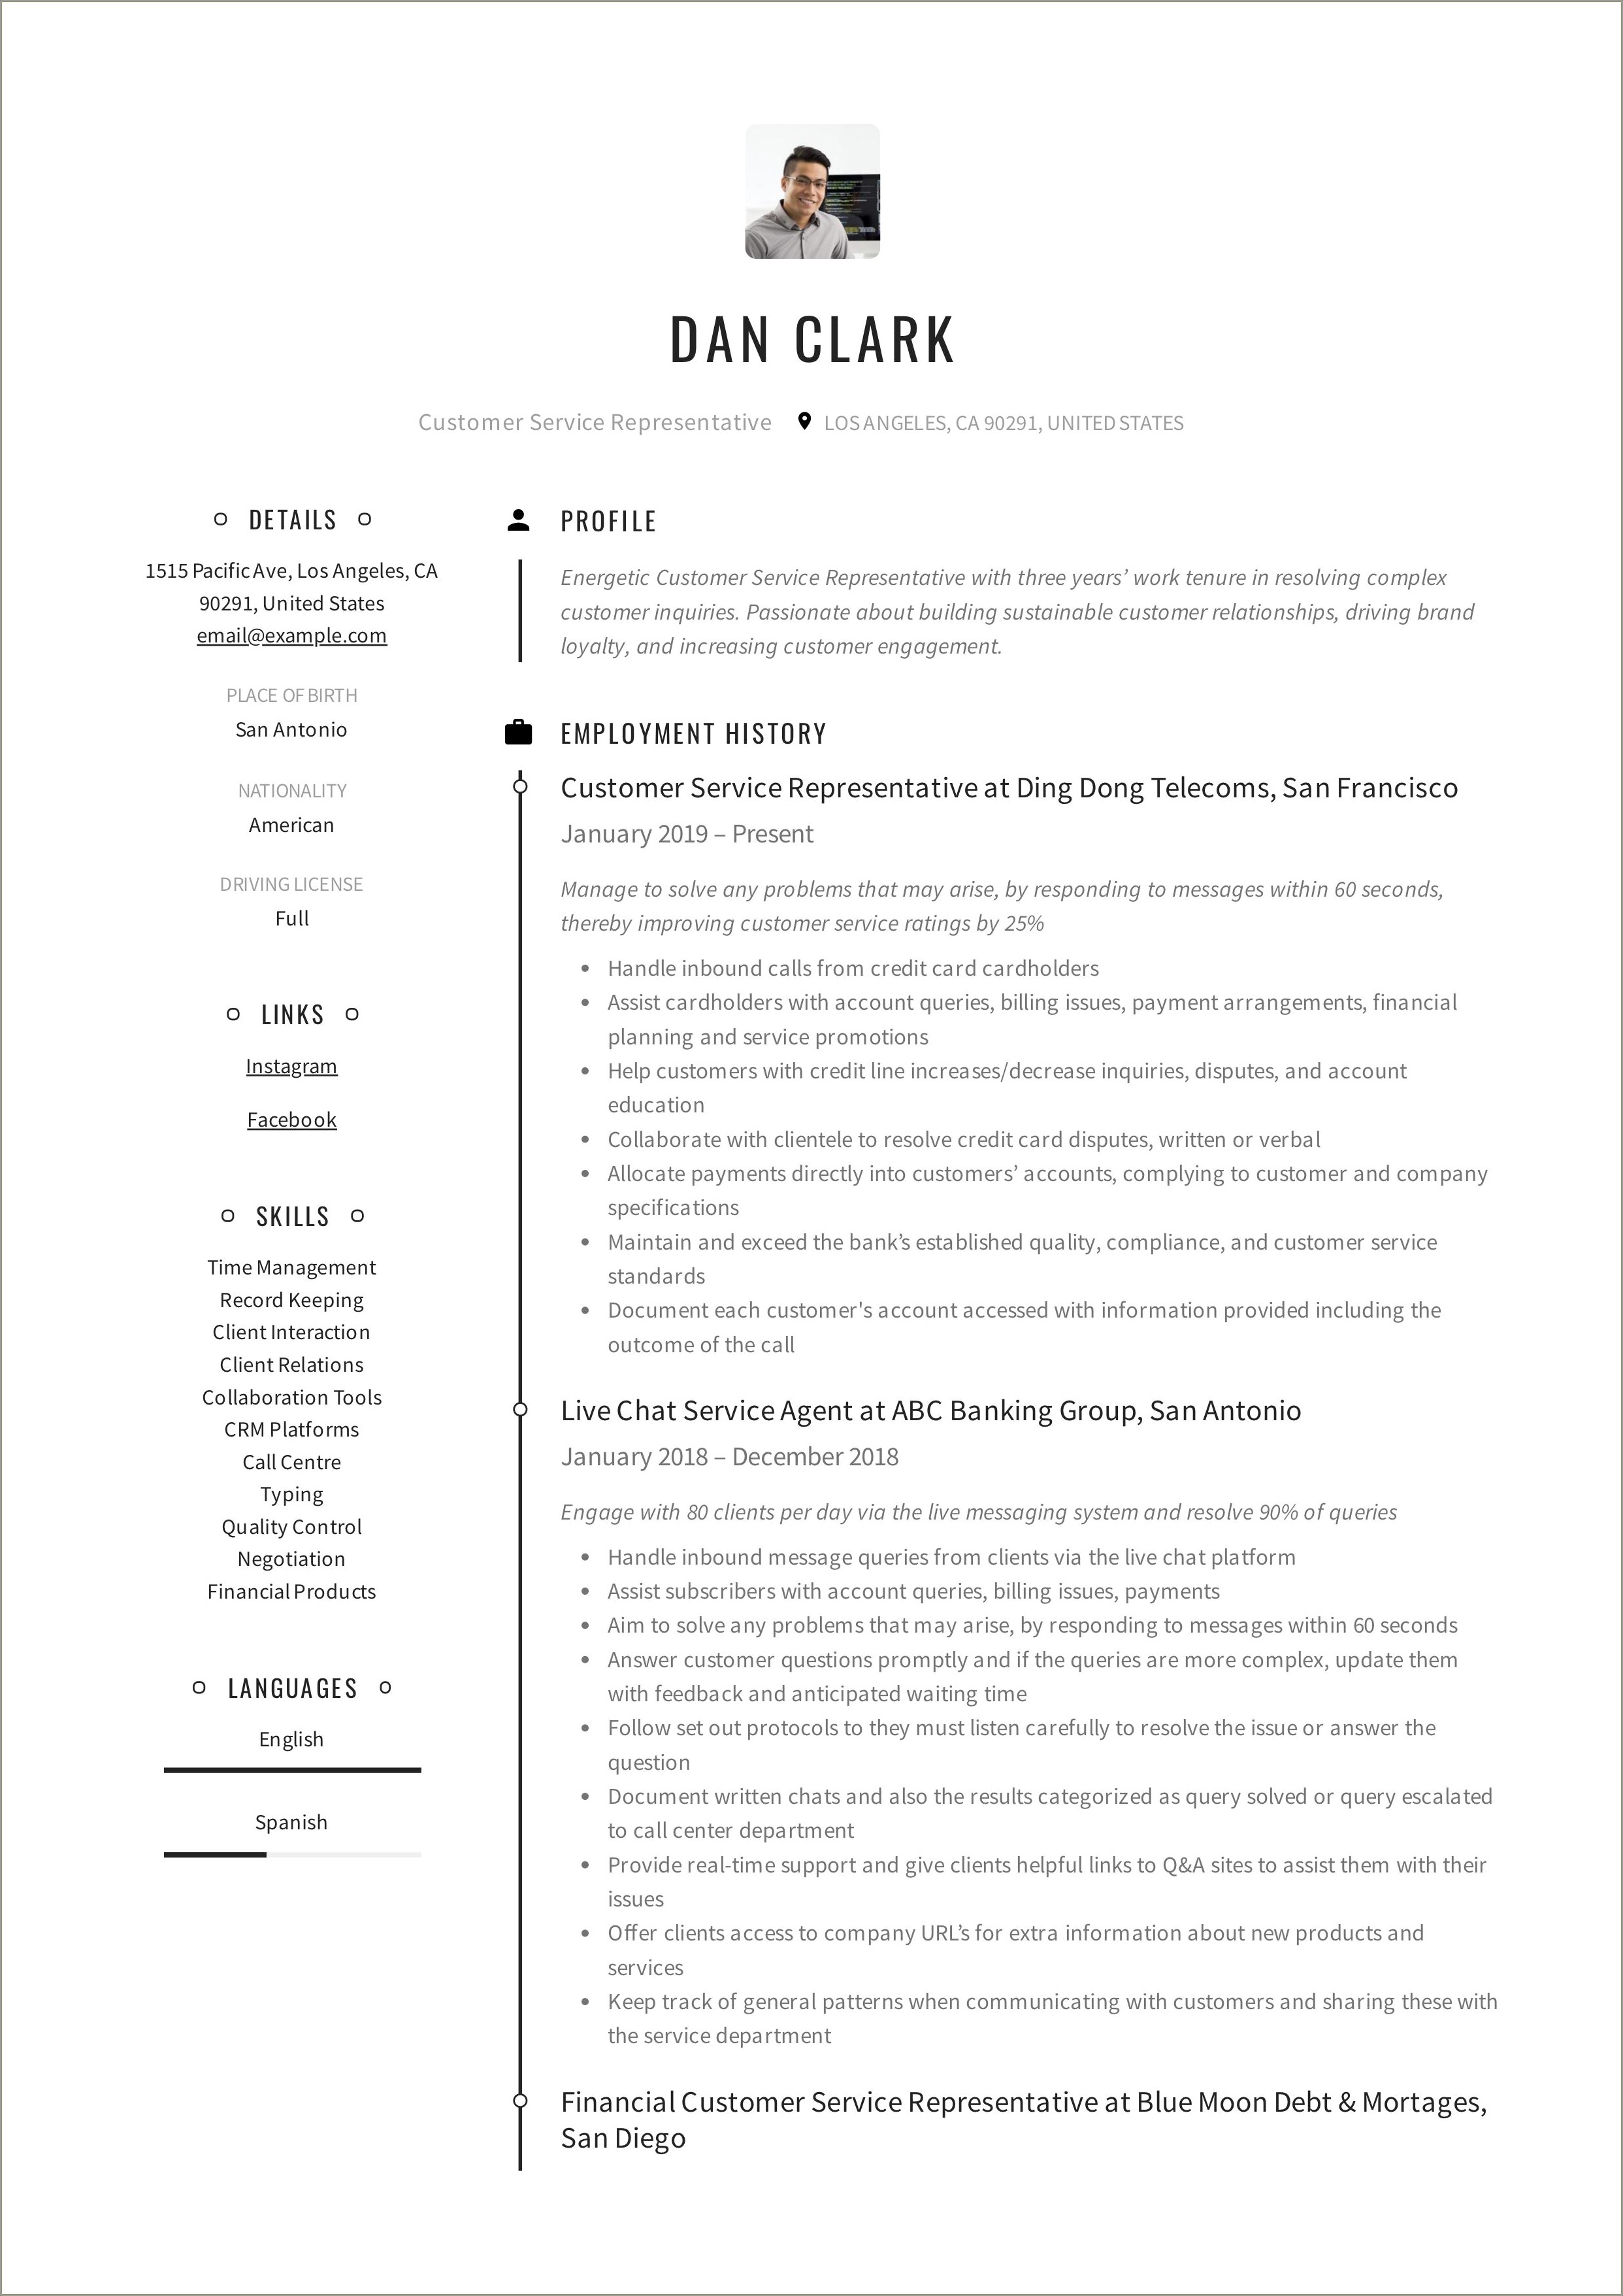 Resume Sales Wording Engaged With Customers